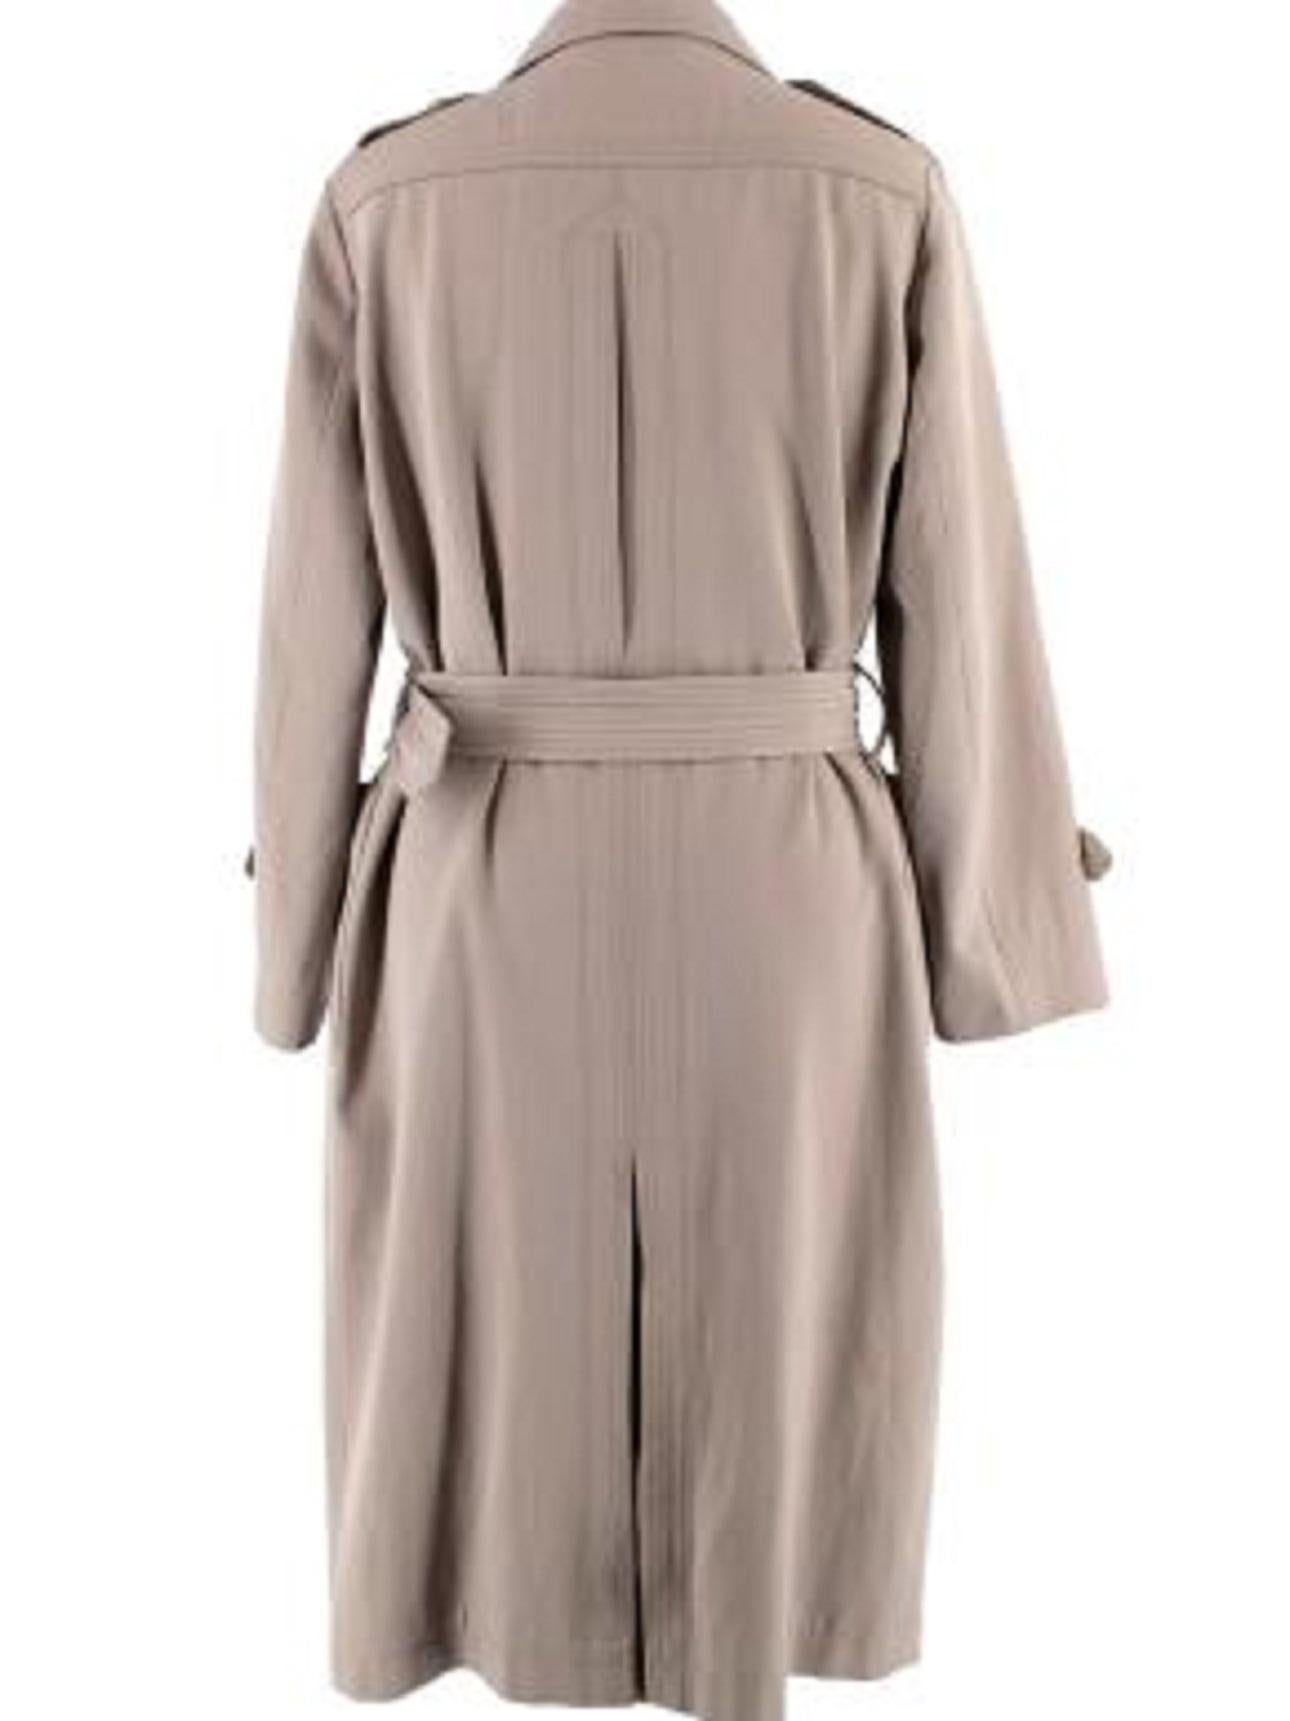 Burberry Taupe Wool-Blend Trench Coat

- Wool and cotton blend taupe double-breasted trench coat with belt 
- 2 large side patch pockets 
- Black leather belt buckle 
- Partially satin lined 
- Button trim on the sleeve cuffs and shoulders 
-